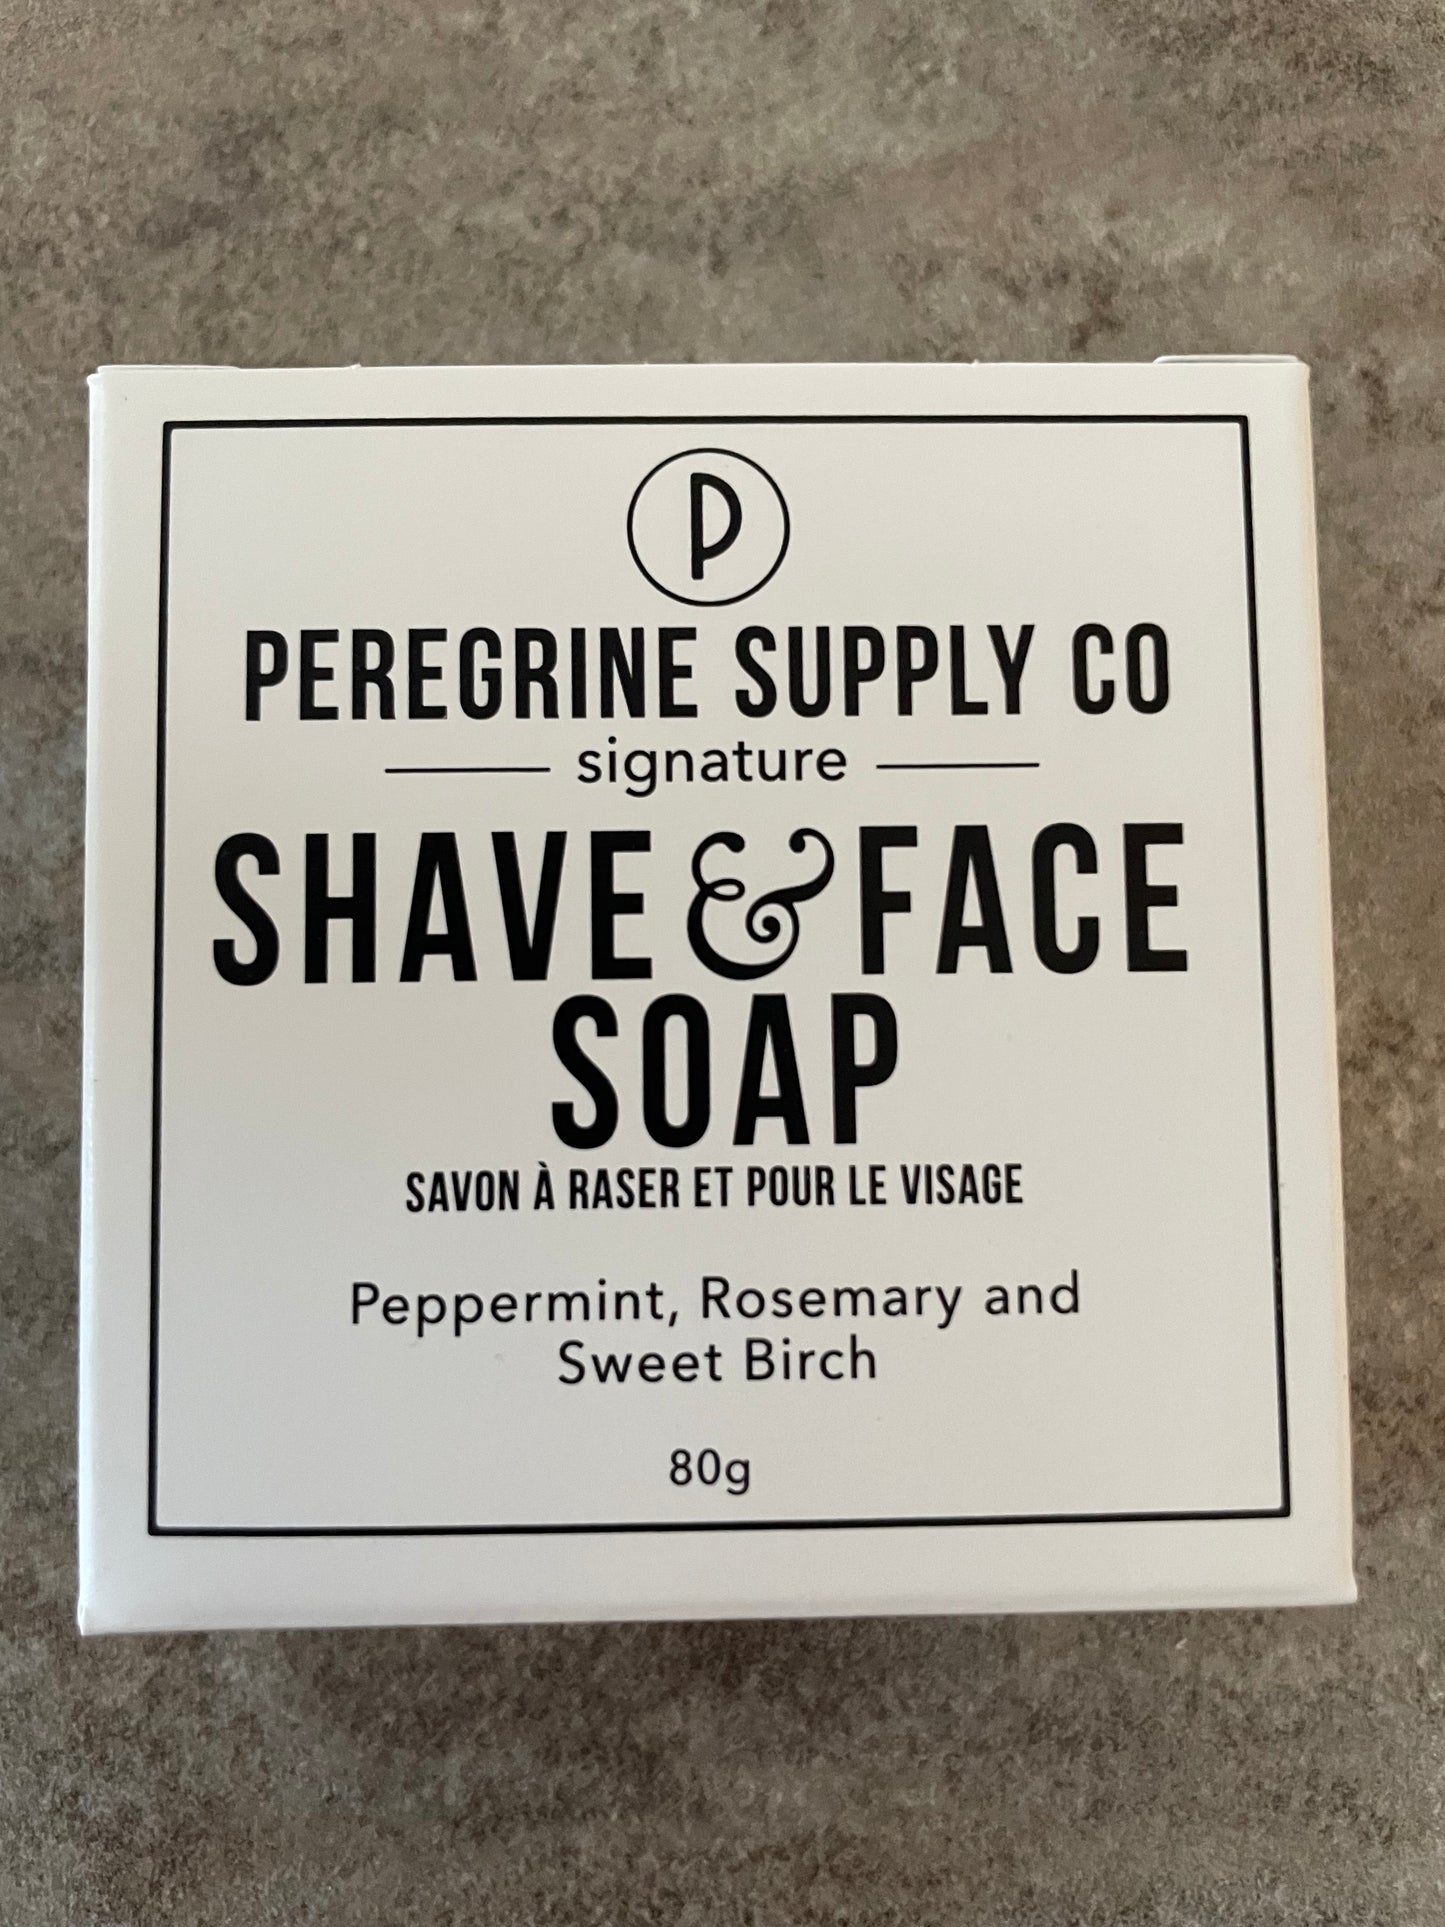 Shave & Face Soap - Peppermint, Rosemary & Sweet Birch